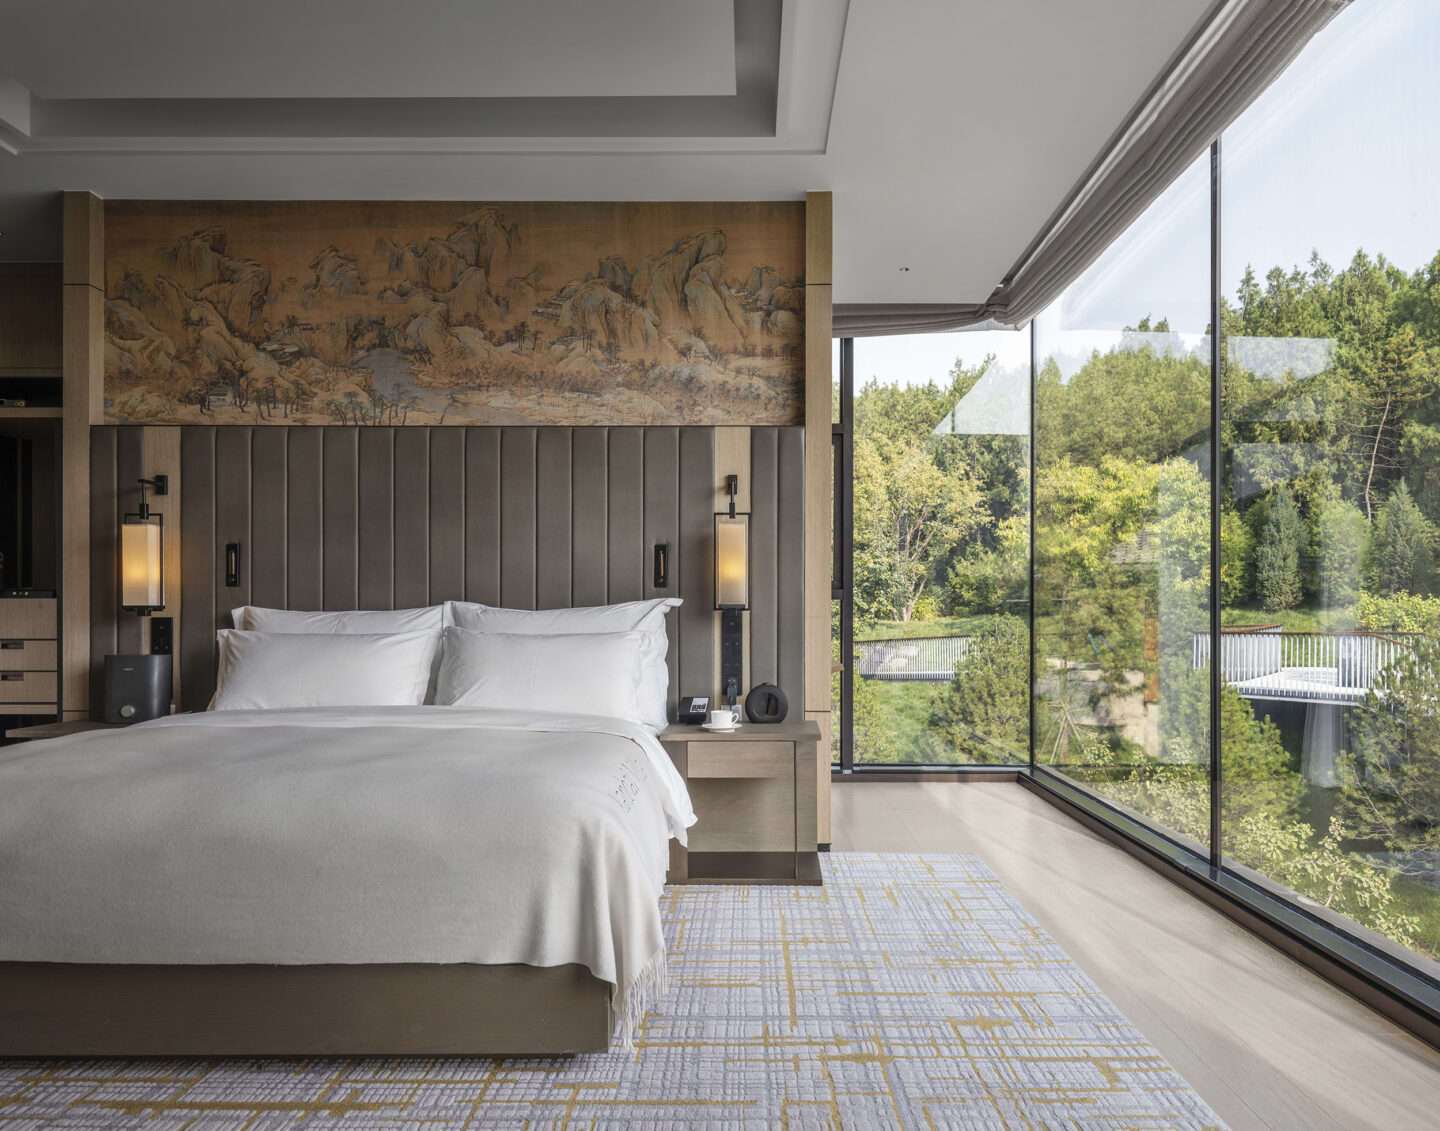 yanbai villas guestroom with chinese mural and floor to ceiling windows looking over the landscape